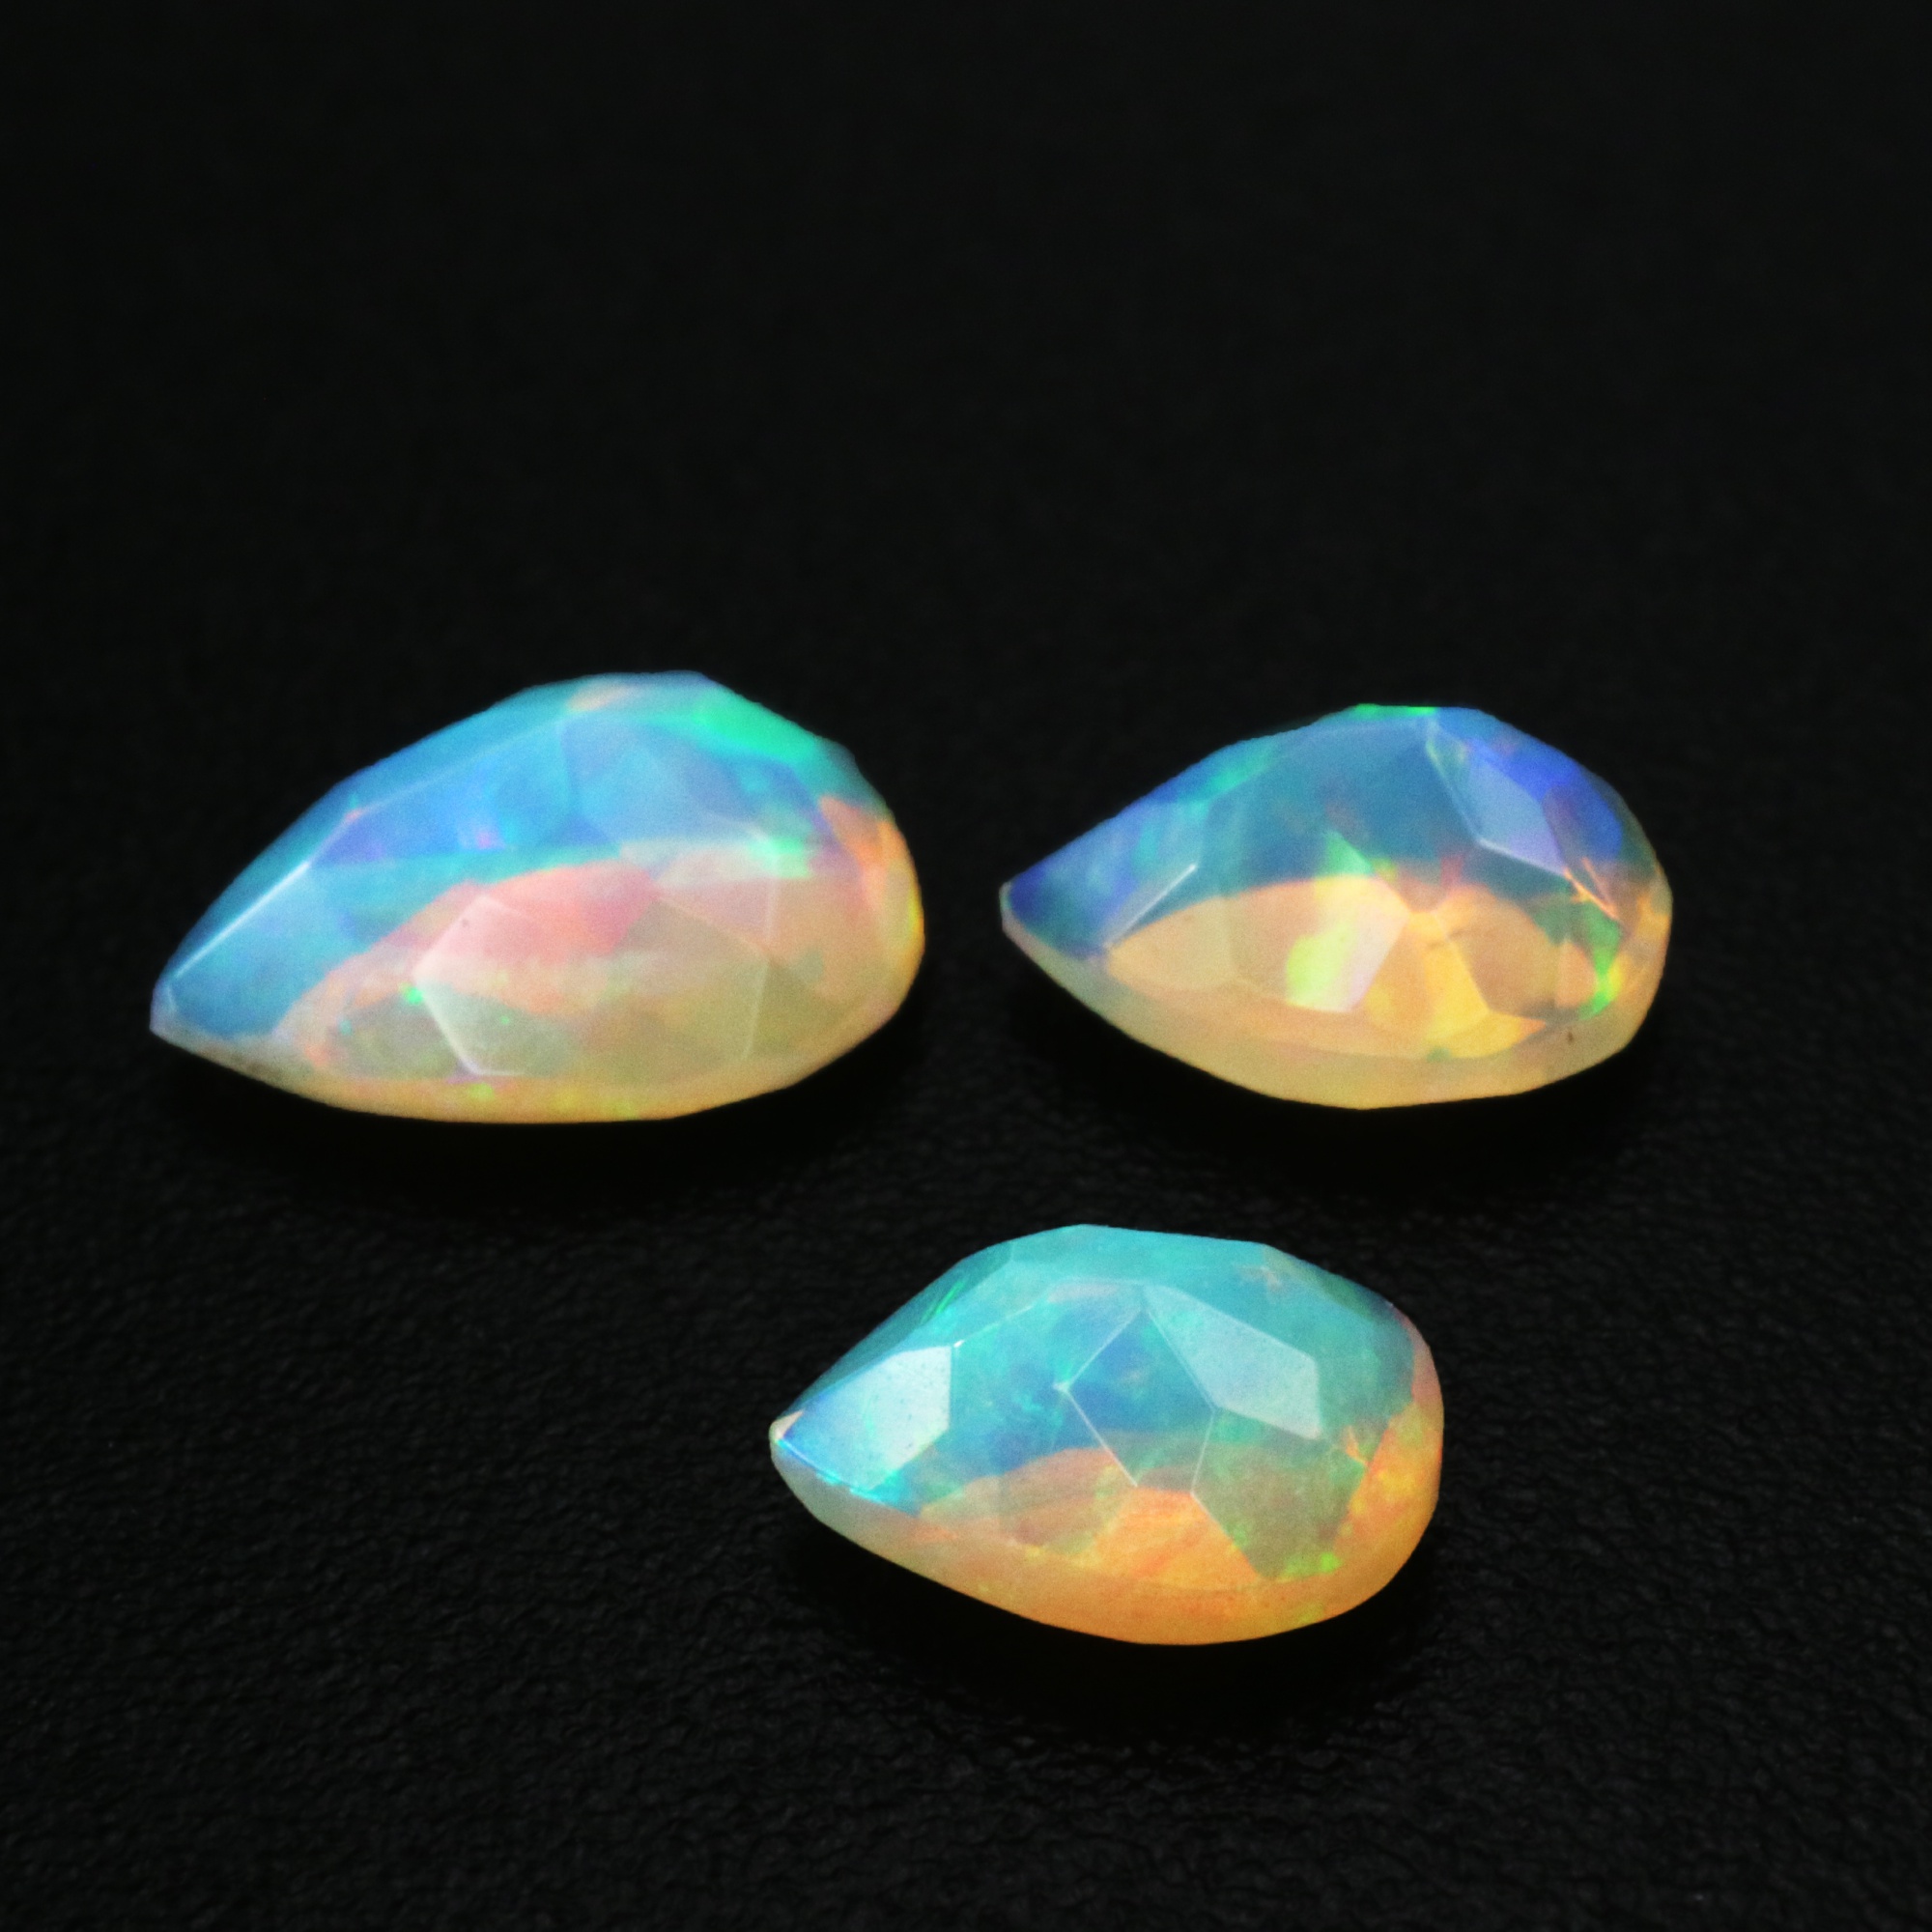 1Pcs Pear Drop Africa Opal October Birthstone Color Changing Faceted Cut AAA Grade Loose Gemstone Natural Semi Precious Stone DIY Jewelry Supplies 4150016 - Click Image to Close